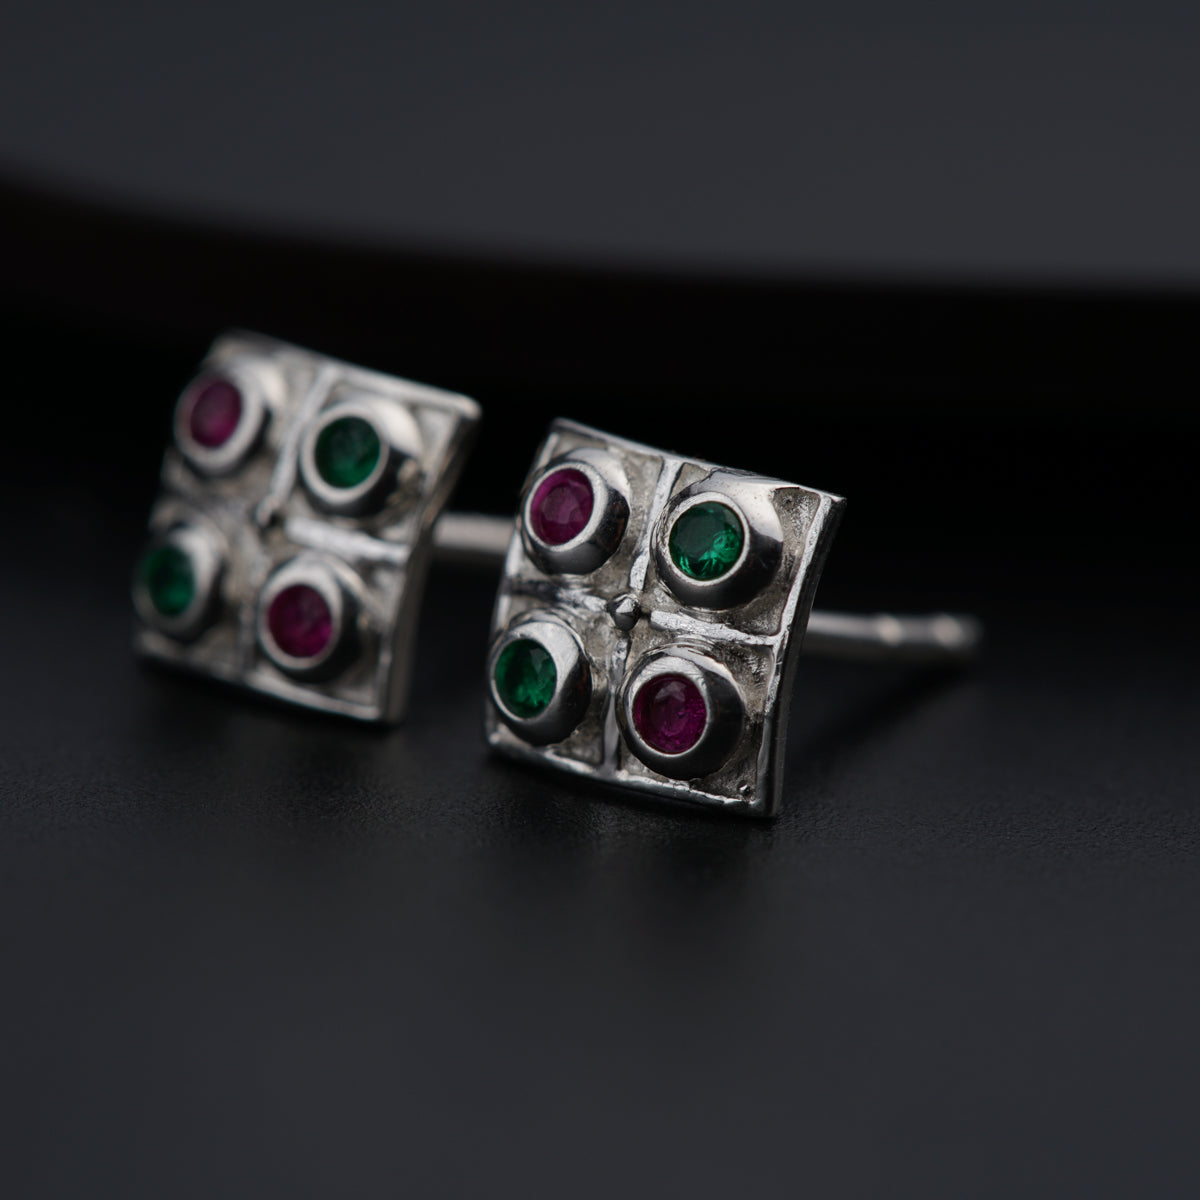 a pair of silver cufflinks with colored stones